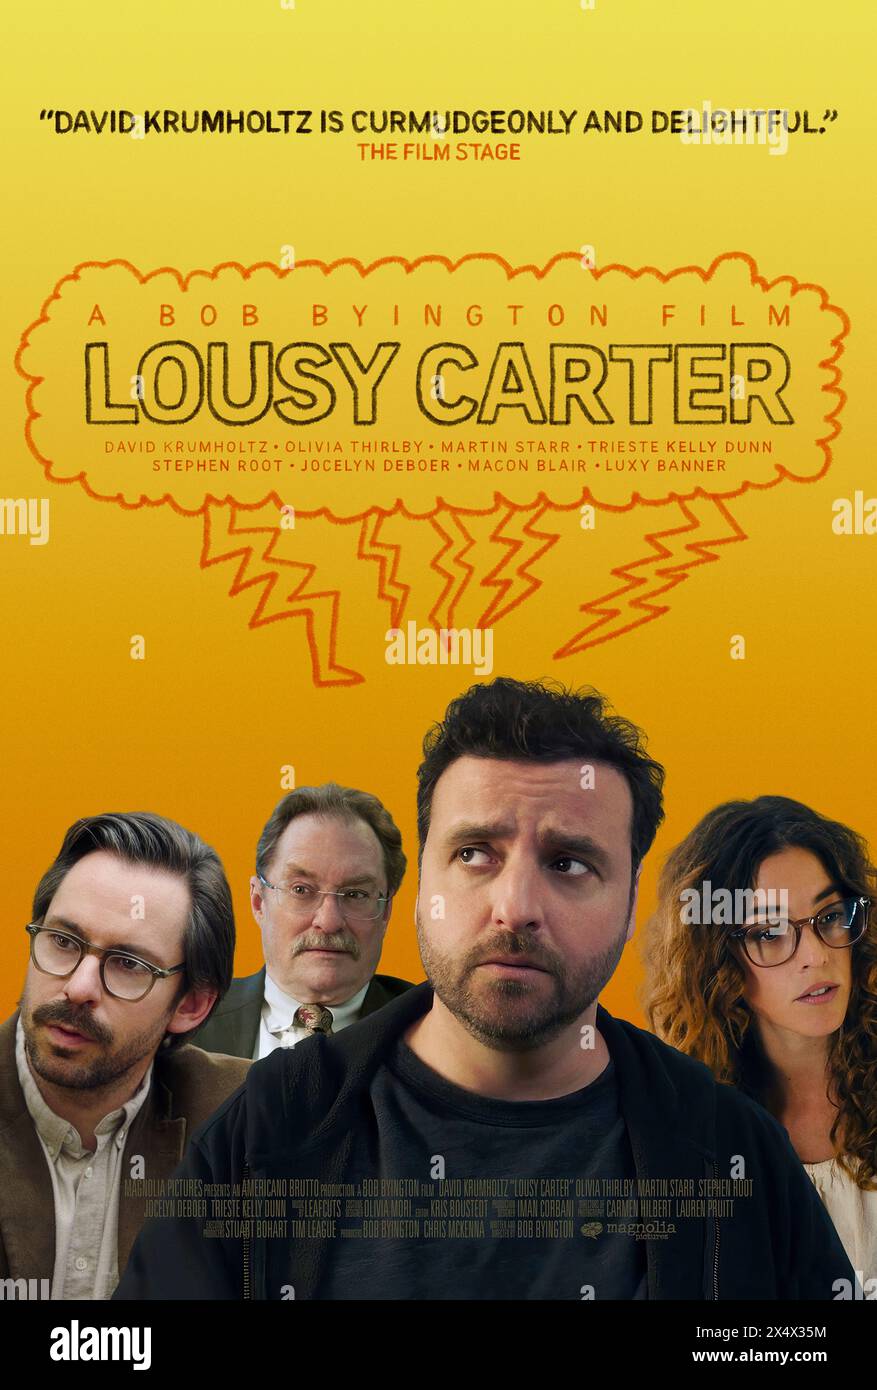 Lousy Carter (2023) directed by Bob Byington and starring David Krumholtz, Martin Starr and Olivia Thirlby. Man-baby Lousy Carter struggles to complete his animated Nabokov adaptation, teaches a graduate seminar on The Great Gatsby, and sleeps with his best friend's wife. He has six months to live. US one sheet poster.***EDITORIAL USE ONLY*** Credit: BFA / Magnet Releasing Stock Photo